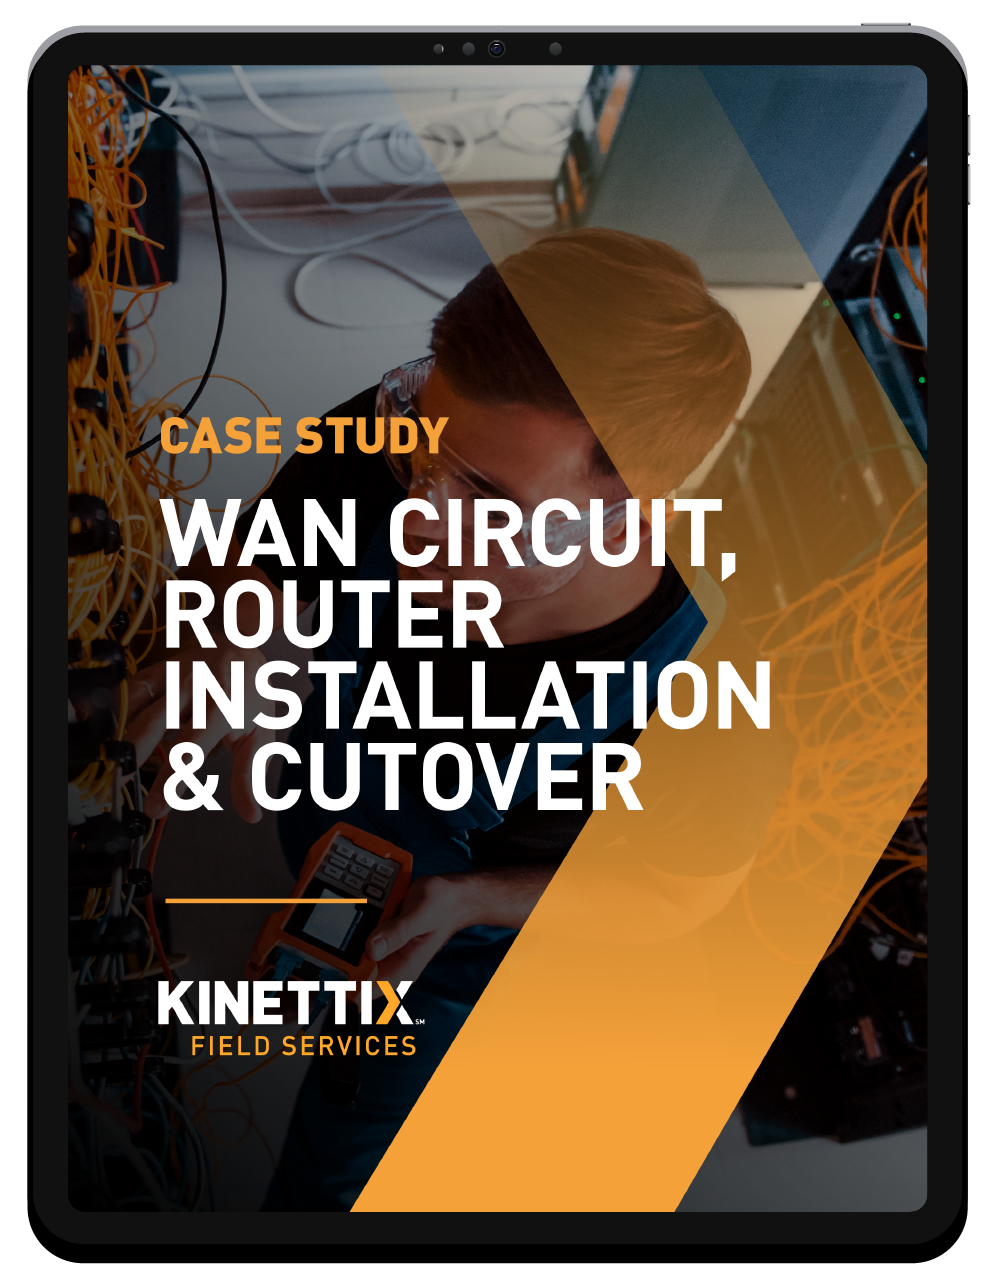 KNTX_WAN-Circuit-Router-Install+Cutover-Case-Study-tabletx1_2023